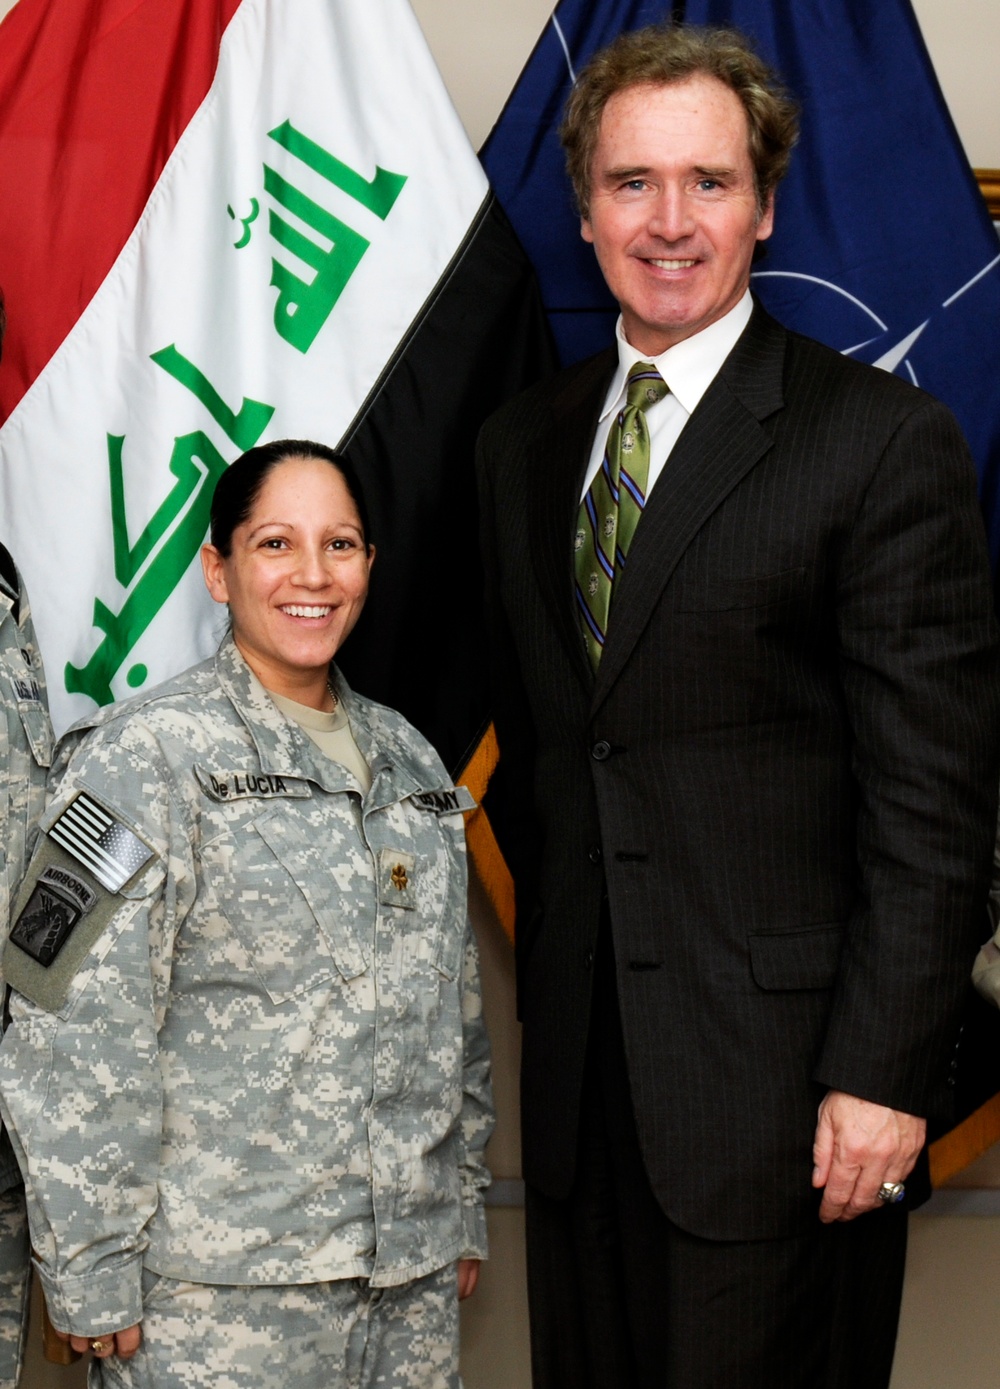 US Representatives meet with service members in Iraq